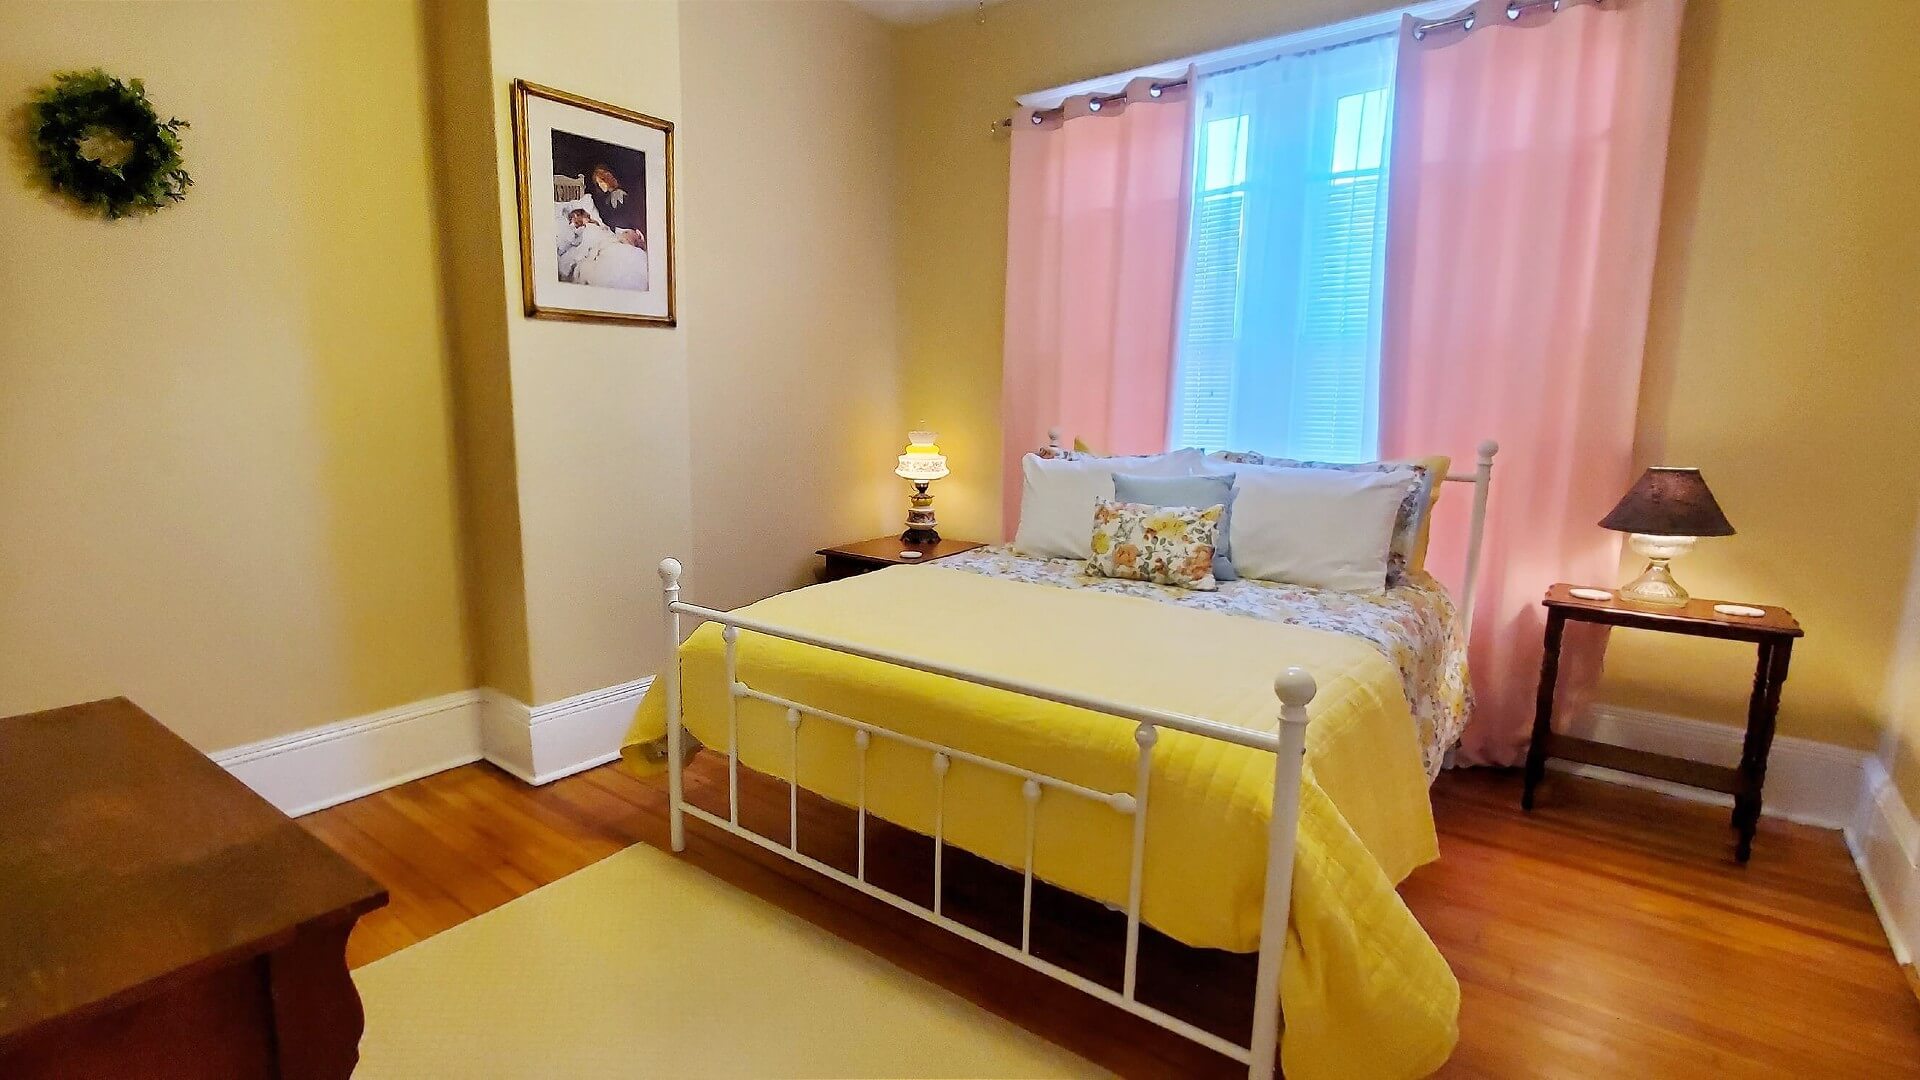 Quaint bedroom with white wrought iron headboard and footboard, yellow walls and window with pink curtains